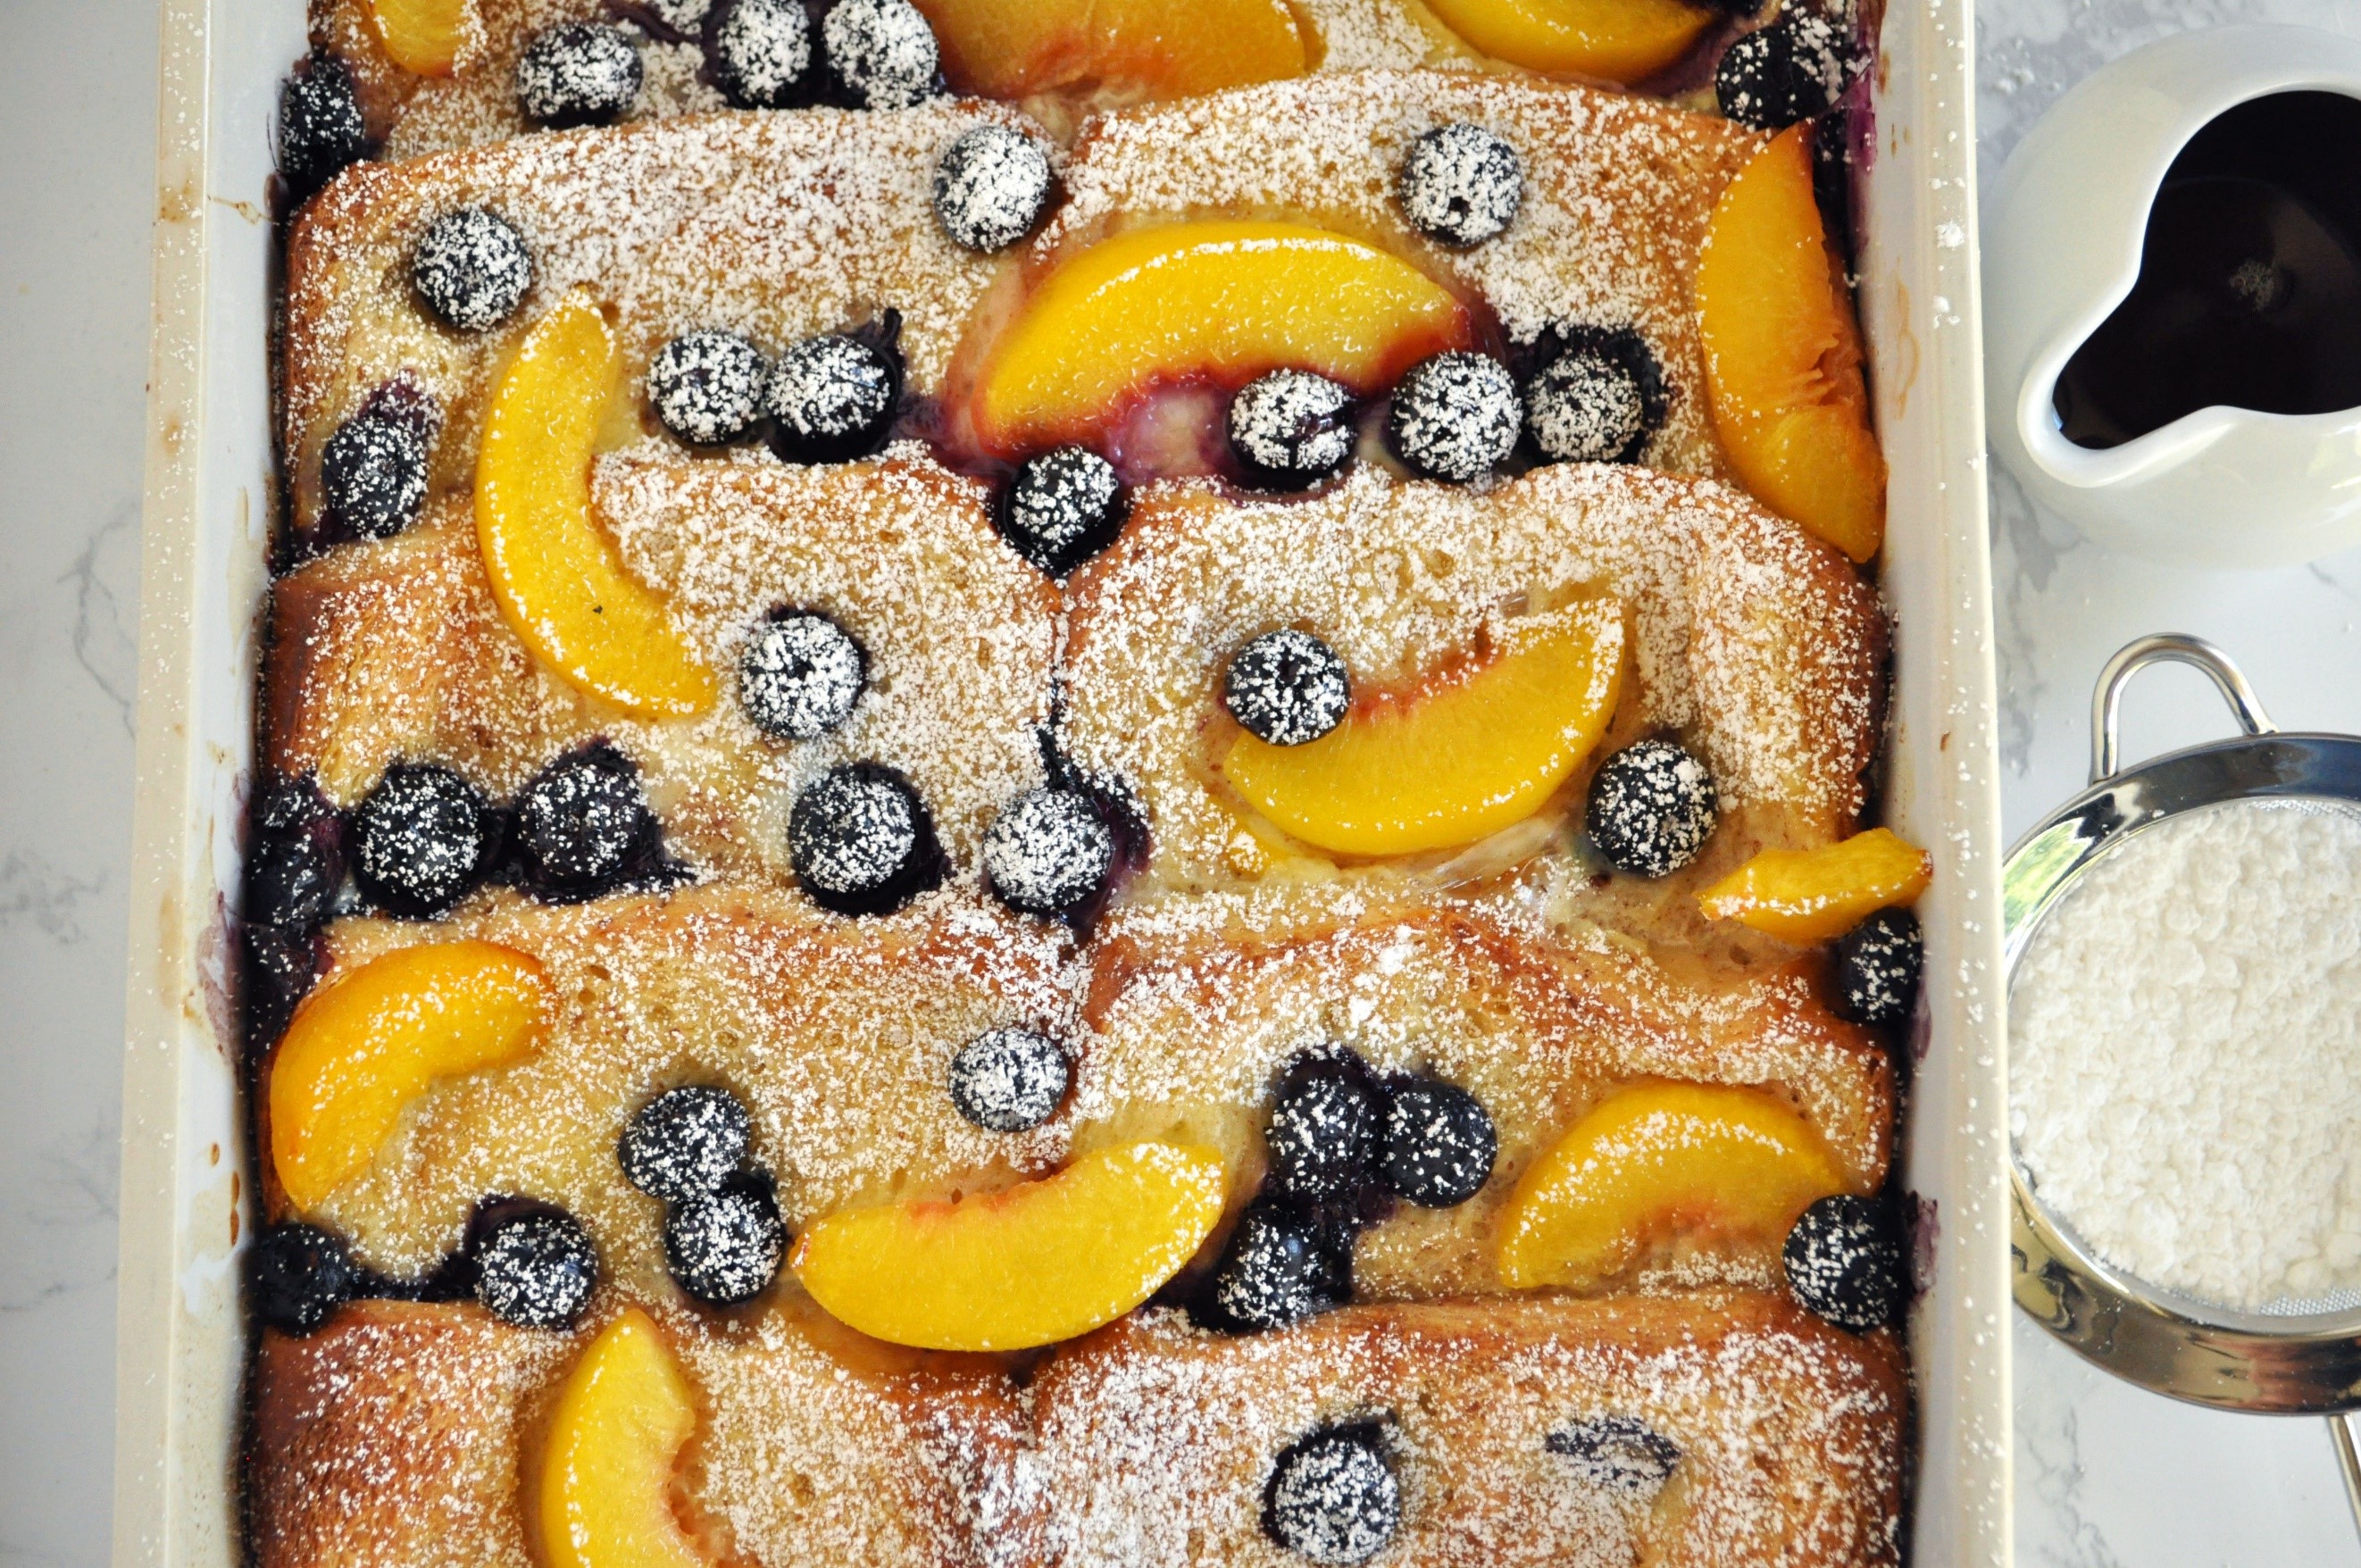 7 Blueberry Peach Baked French Toast